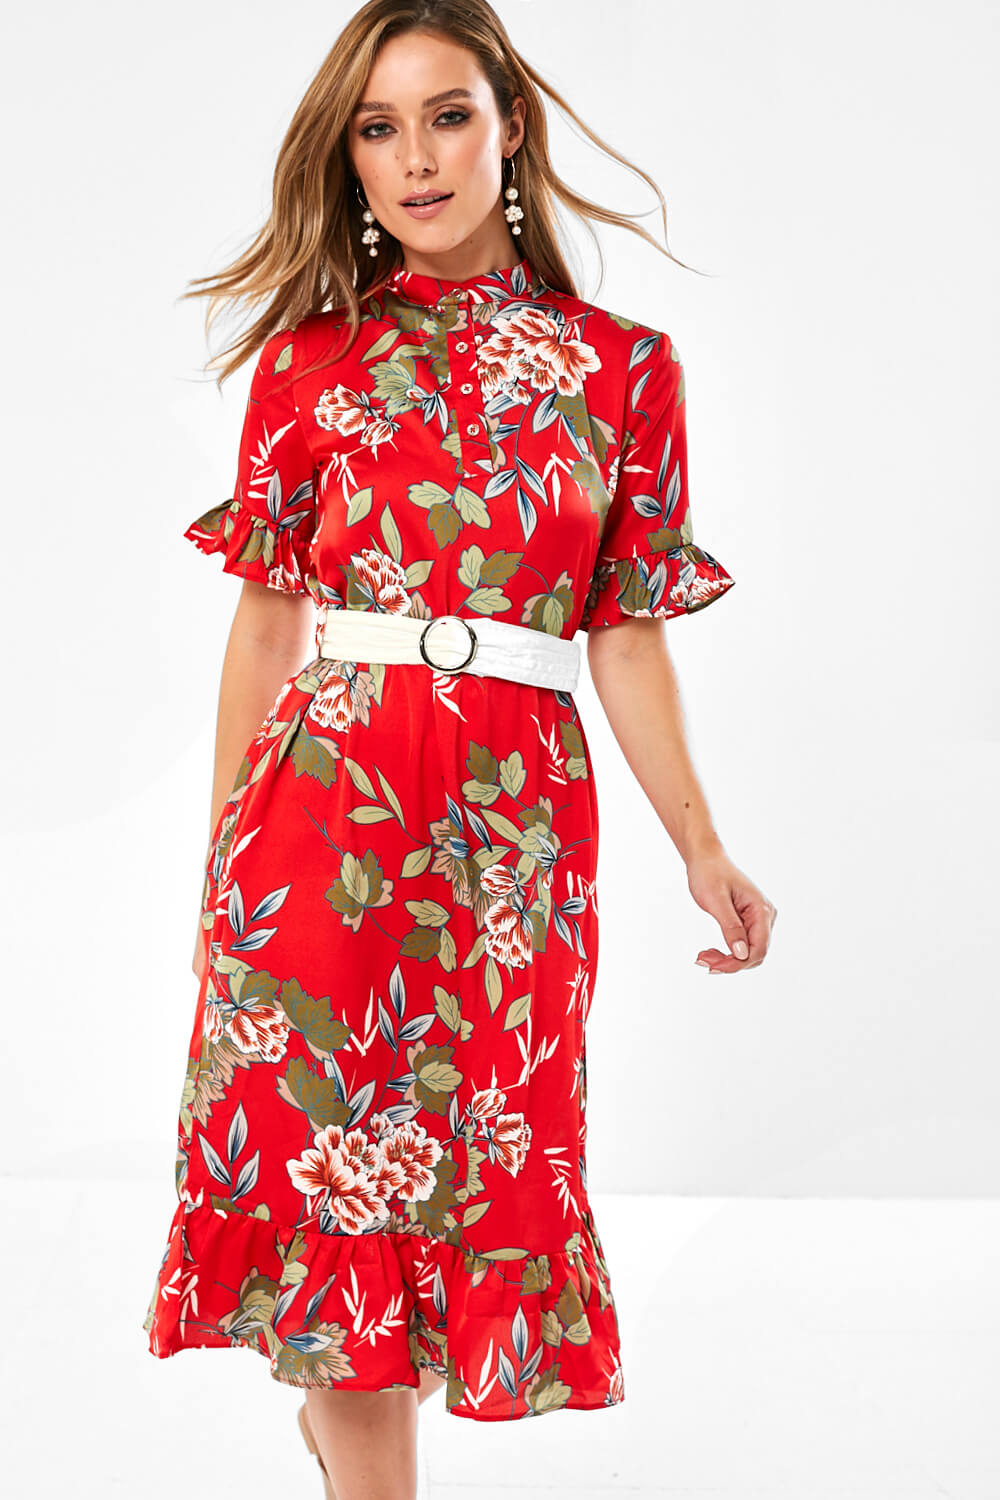 Marc Angelo Emerson Floral Print Belted Dress in Red | iCLOTHING ...